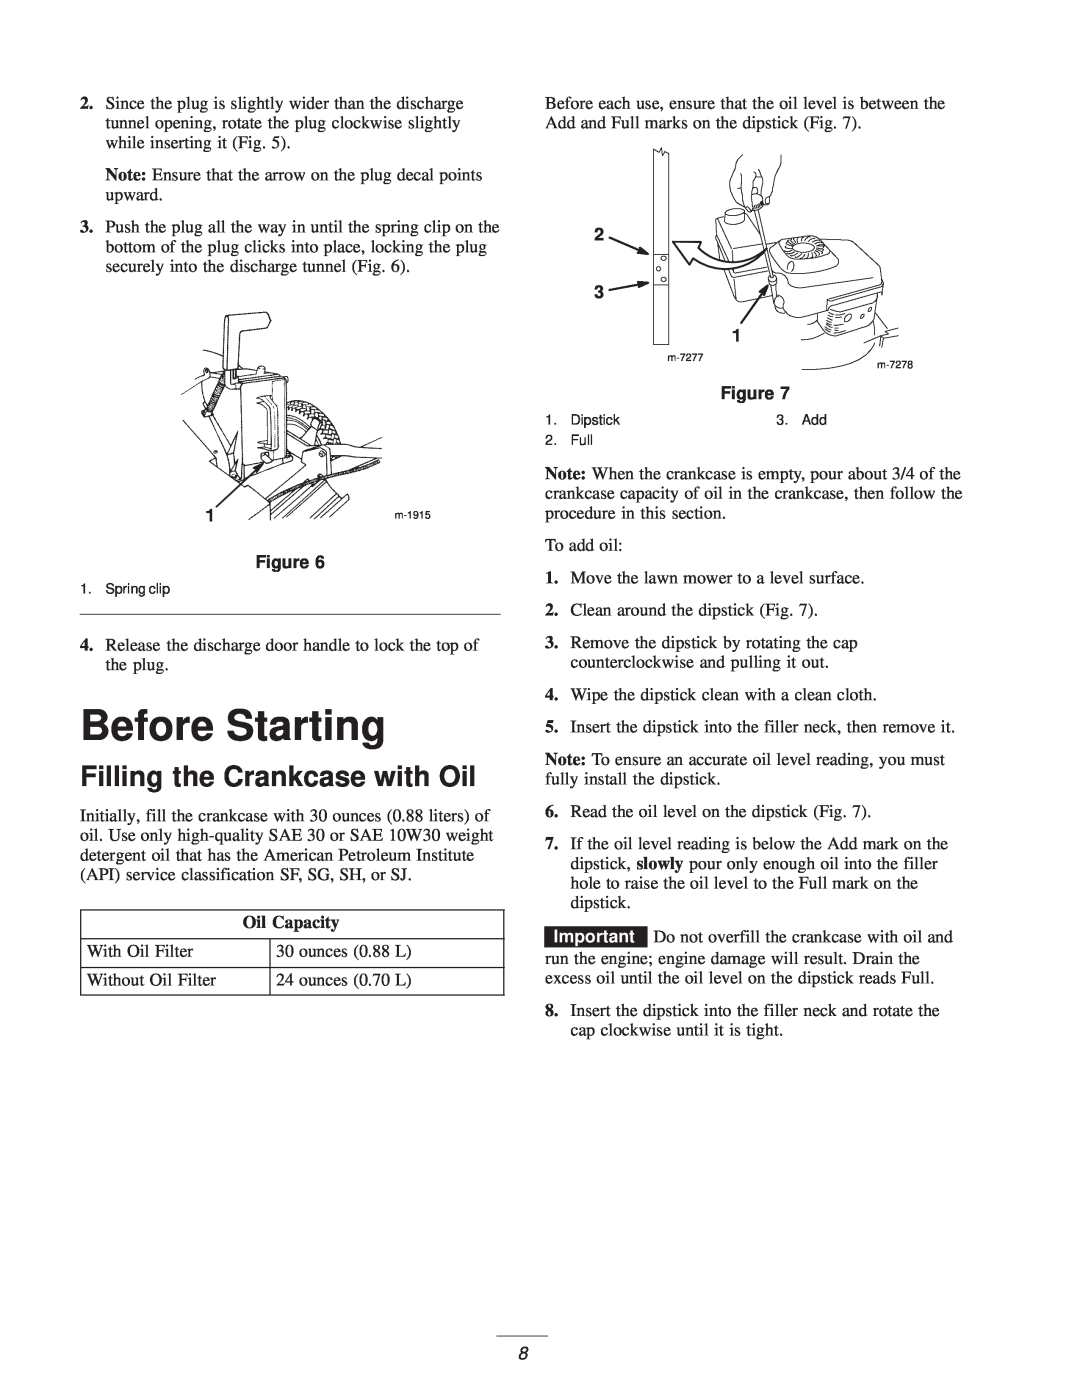 Exmark M216KA, M216KASP manual Before Starting, Filling the Crankcase with Oil, Oil Capacity 